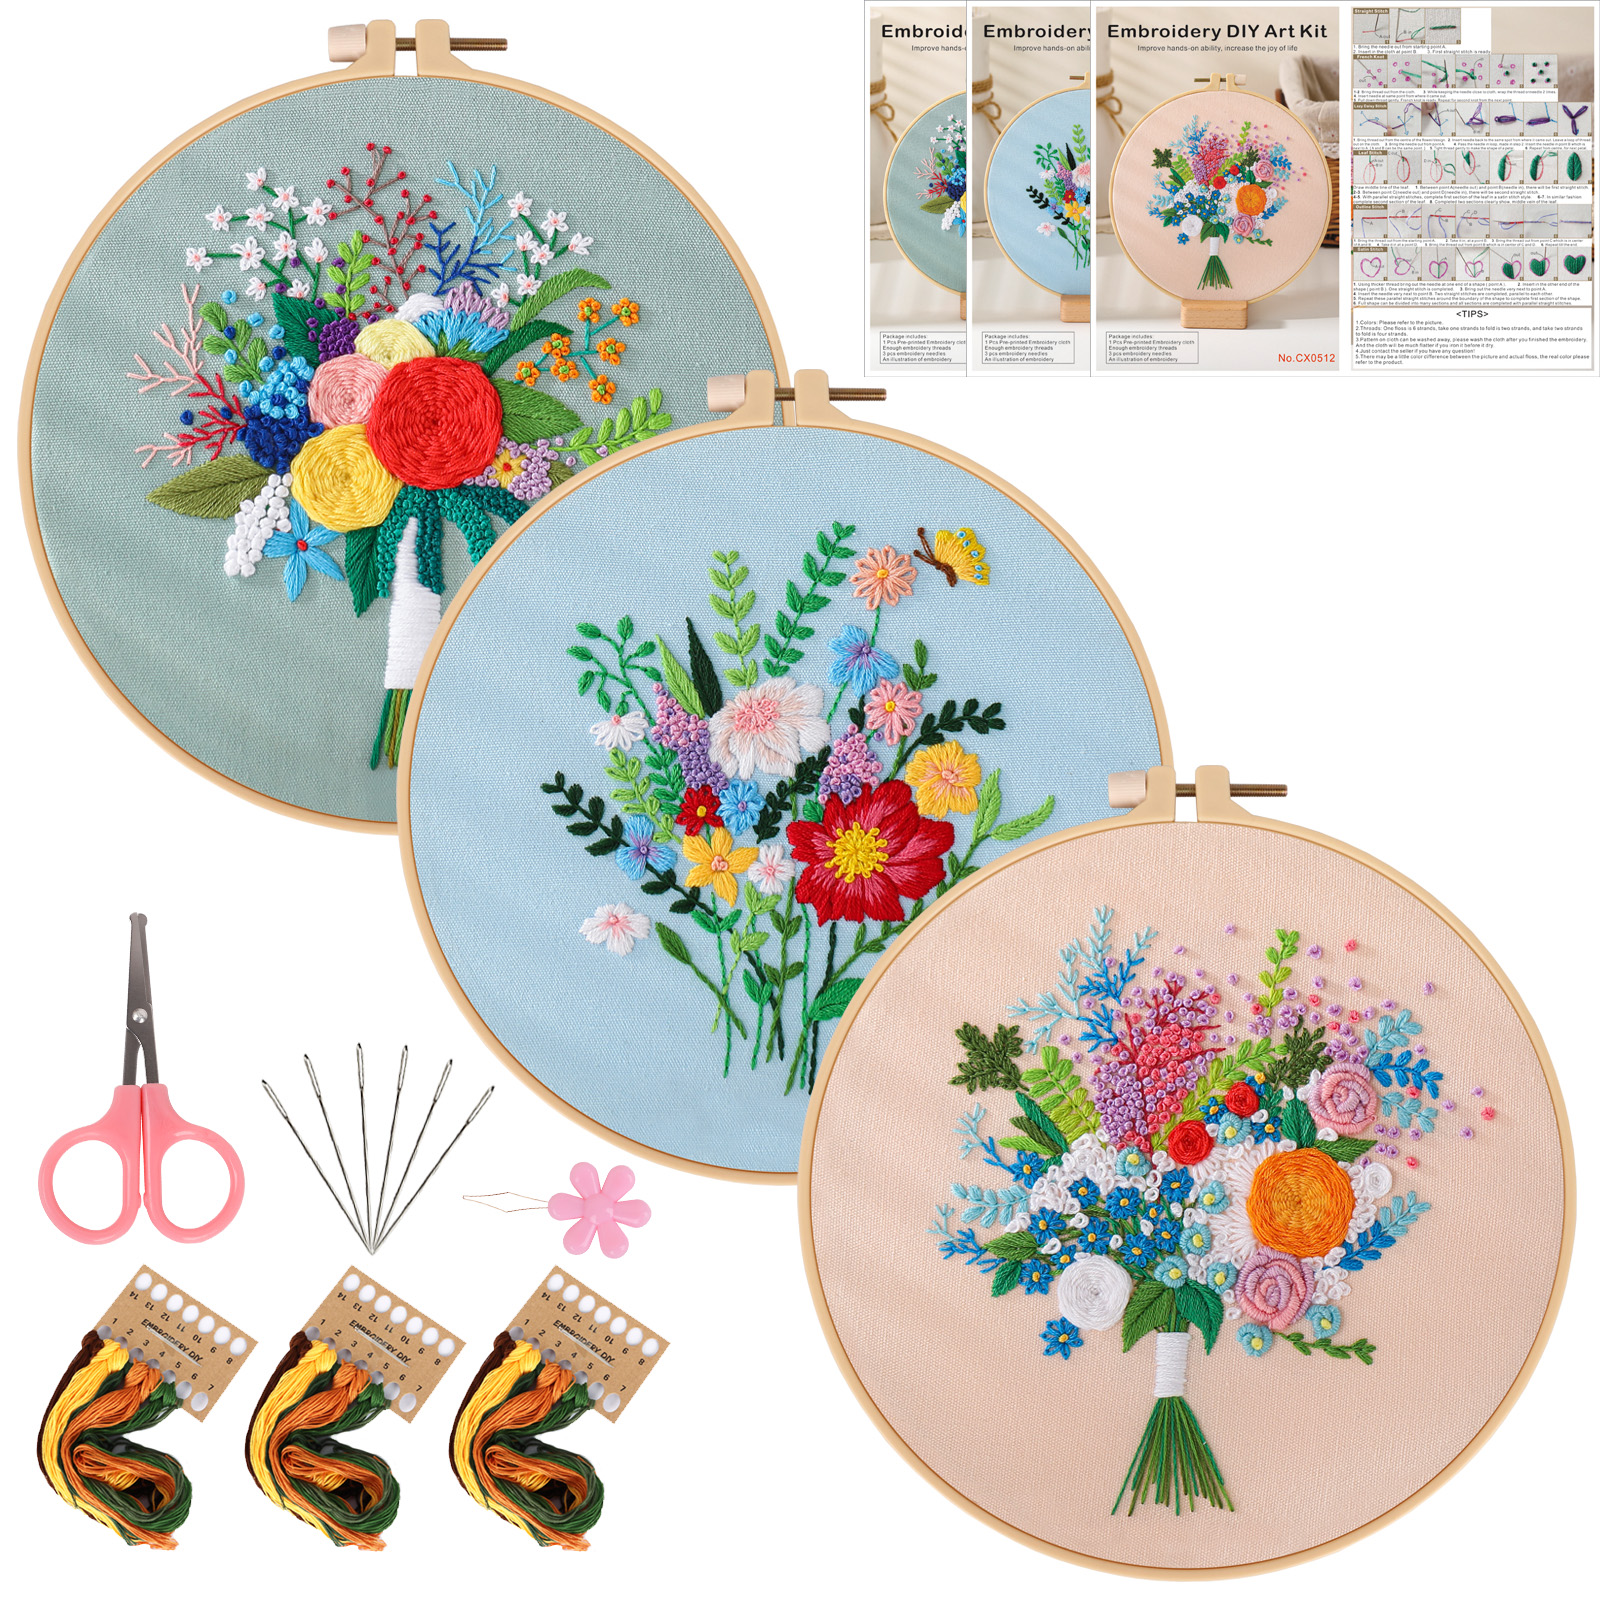 3pcs/set Embroidery Kit, Flower Bouquet Pattern, Including 1 Embroidery Hoop 7.9 Inch, DIY Knitting & Crochet Gift